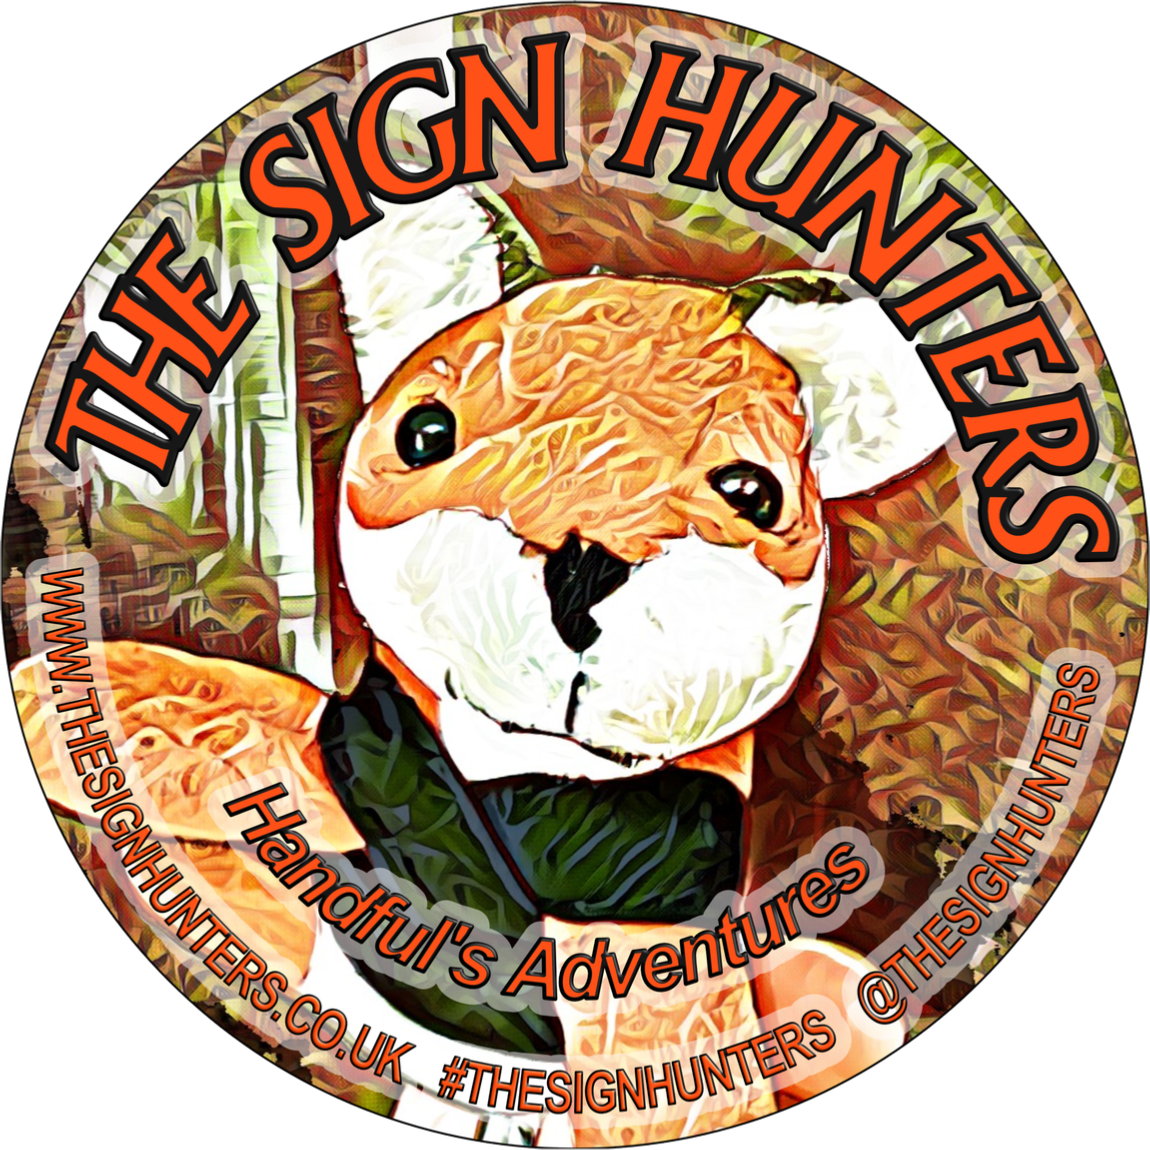 Enter the ‘The Sign Hunters’ official landing page